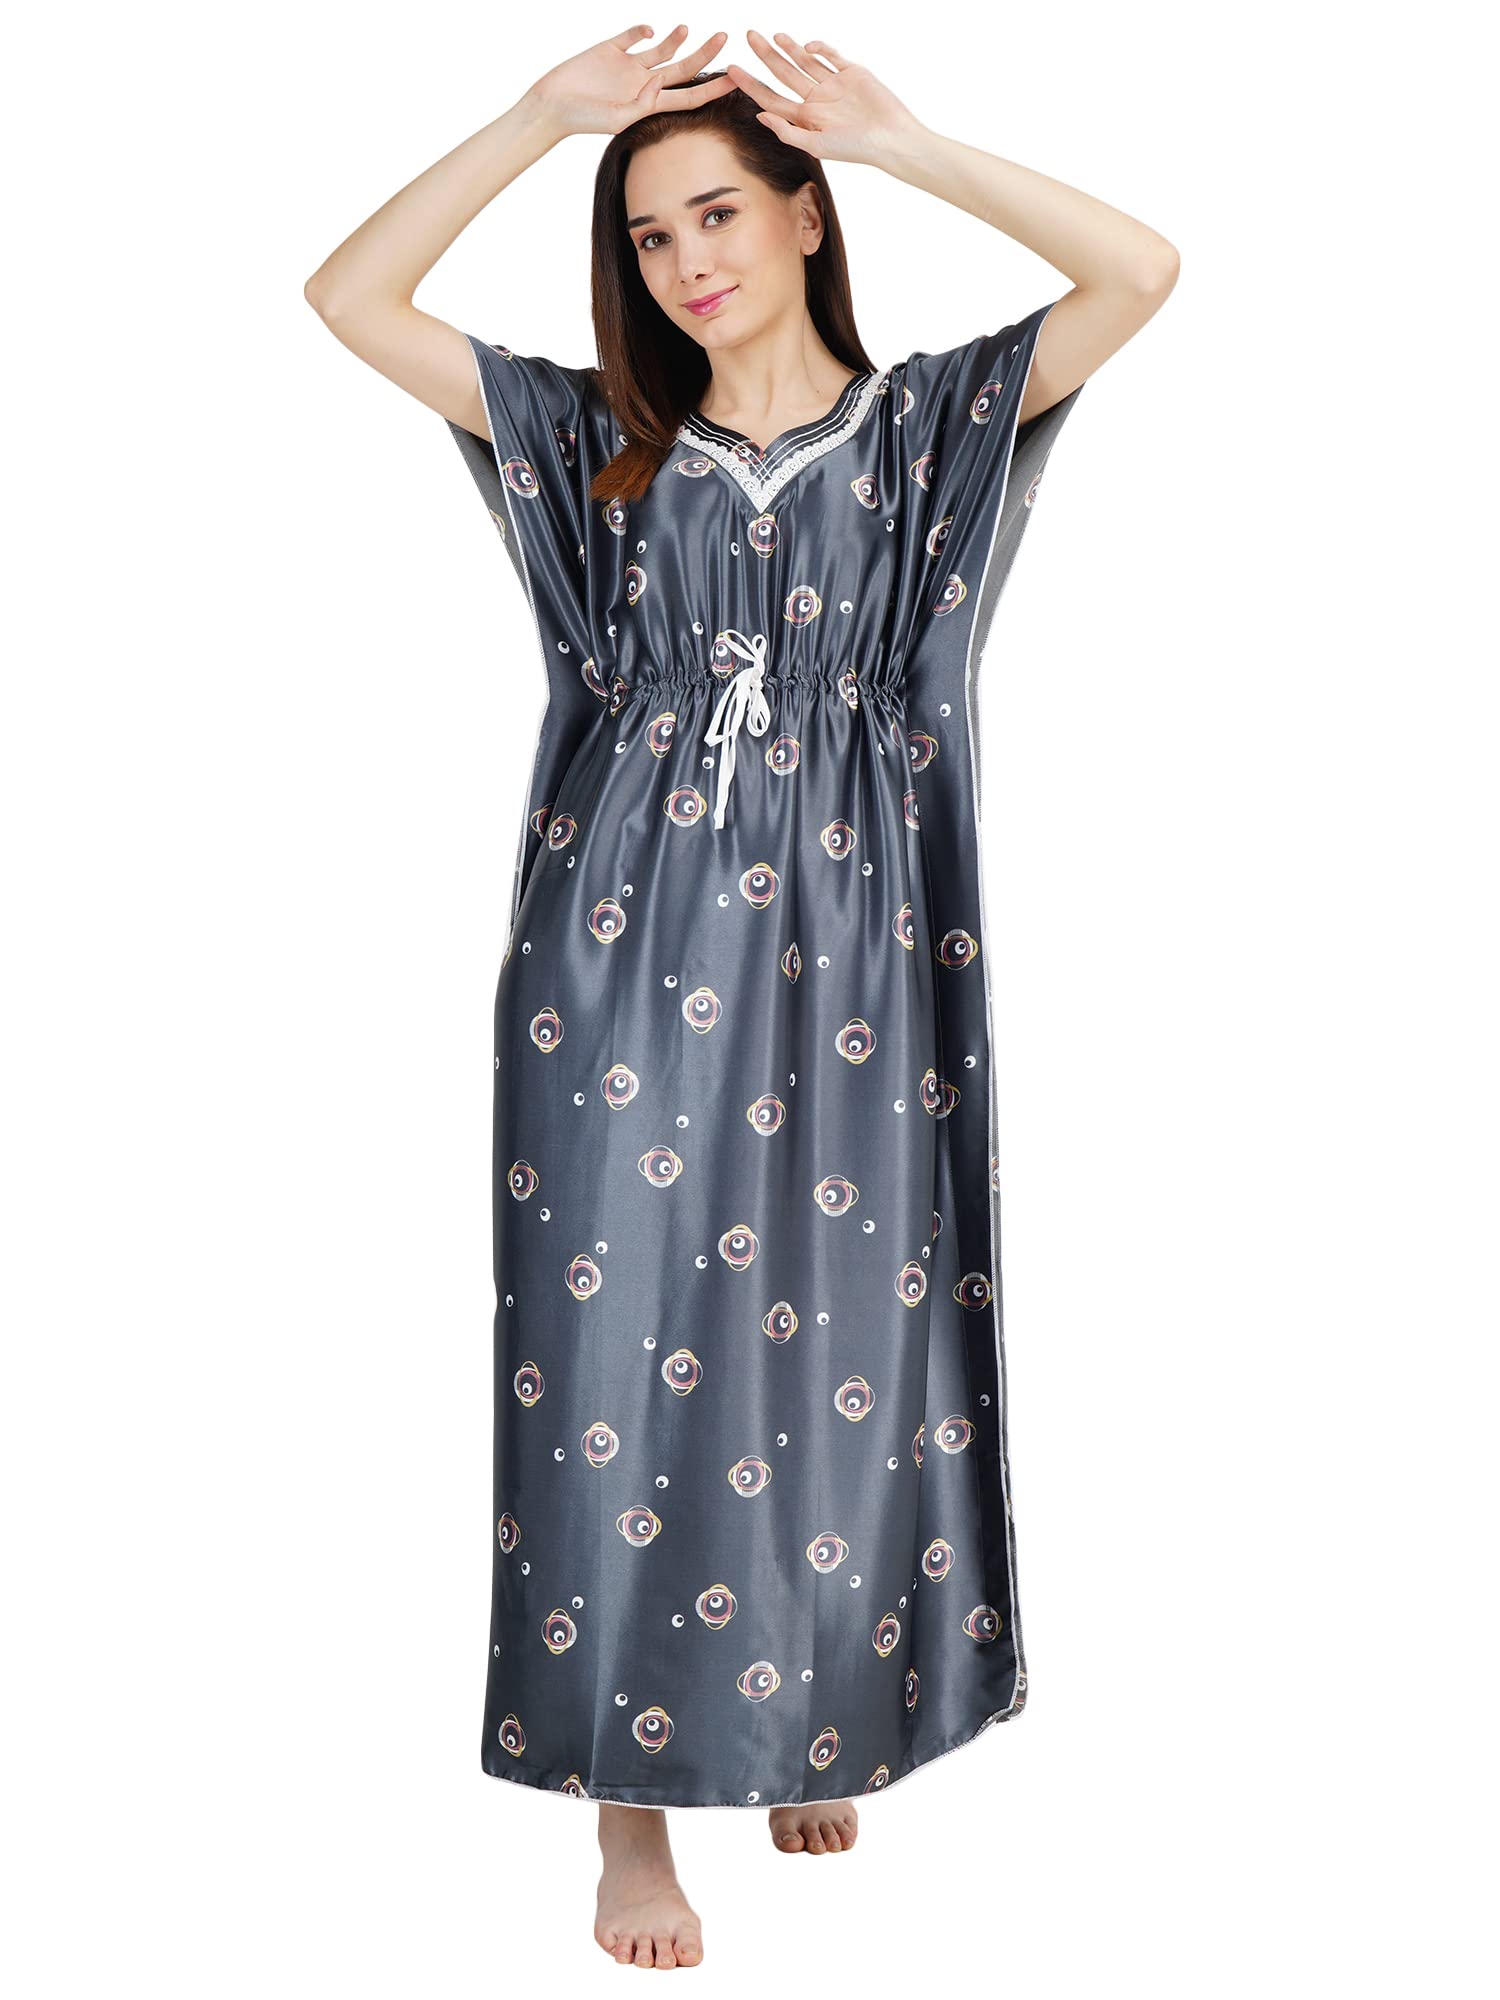 KOI SLEEPWEAR Pink Dotted Alpine Nightdress with Beautiful Embroidery and  Pockets Comfortable for Women